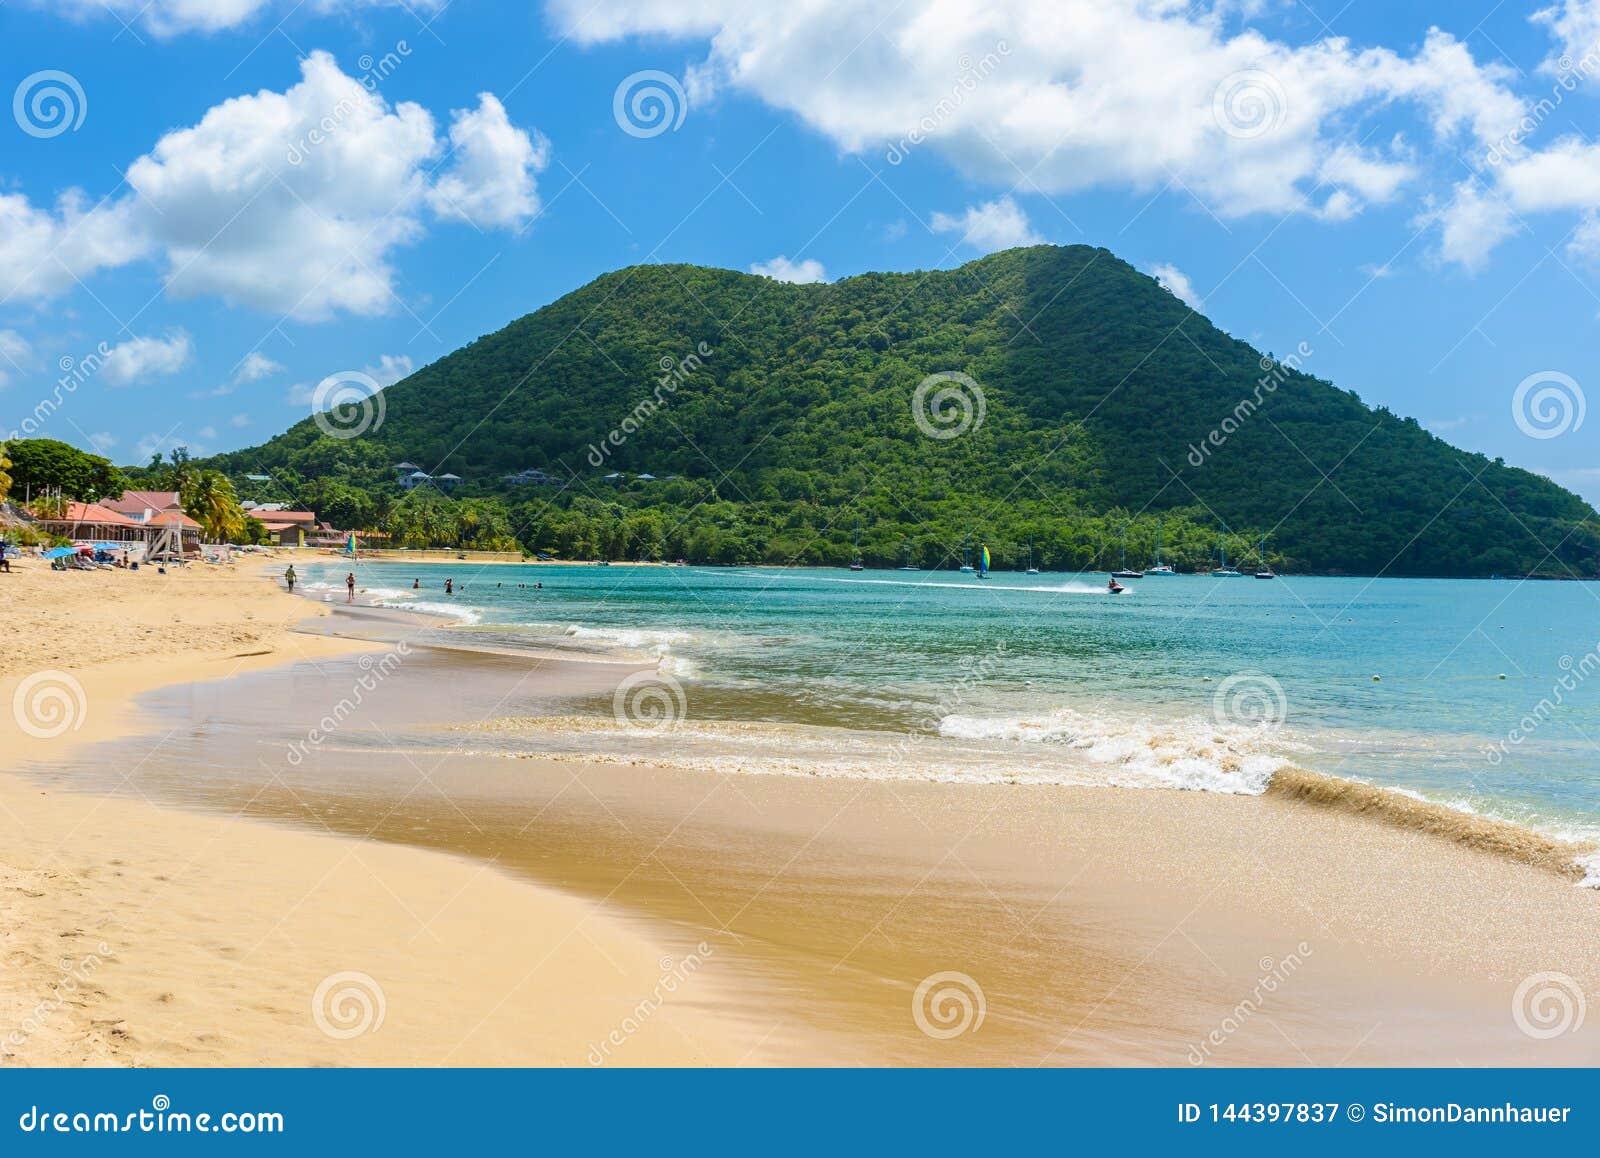 reduit beach - tropical coast on the caribbean island of st. lucia. it is a paradise destination with a white sand beach and